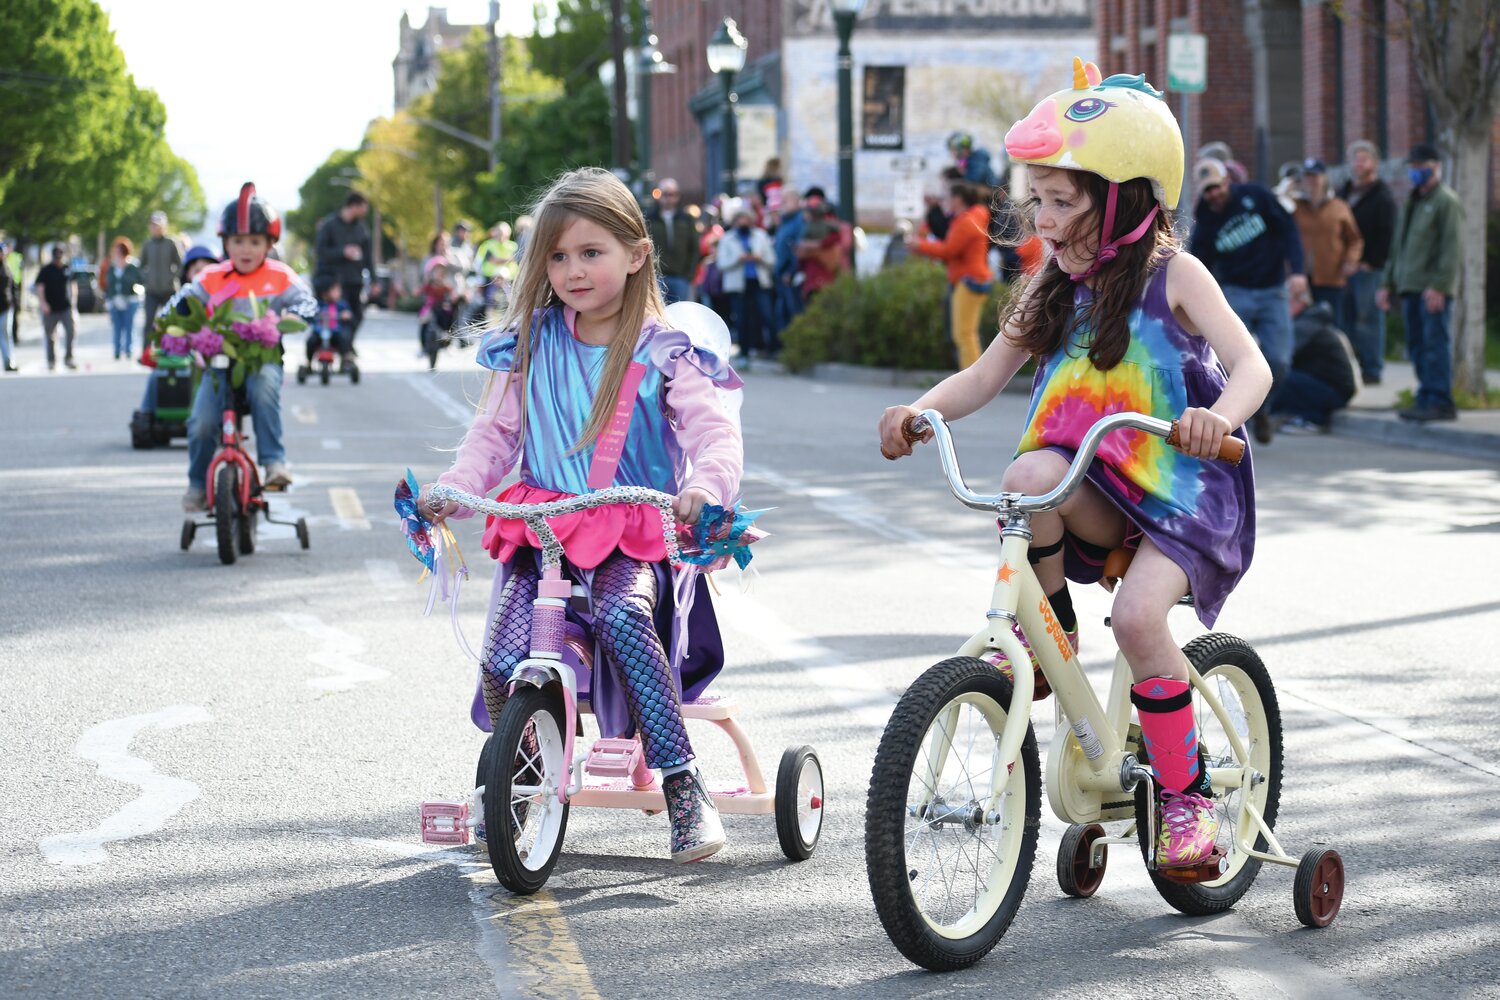 Two youngsters at last year’s Rhody Trike Race stop to chit chat following the race.